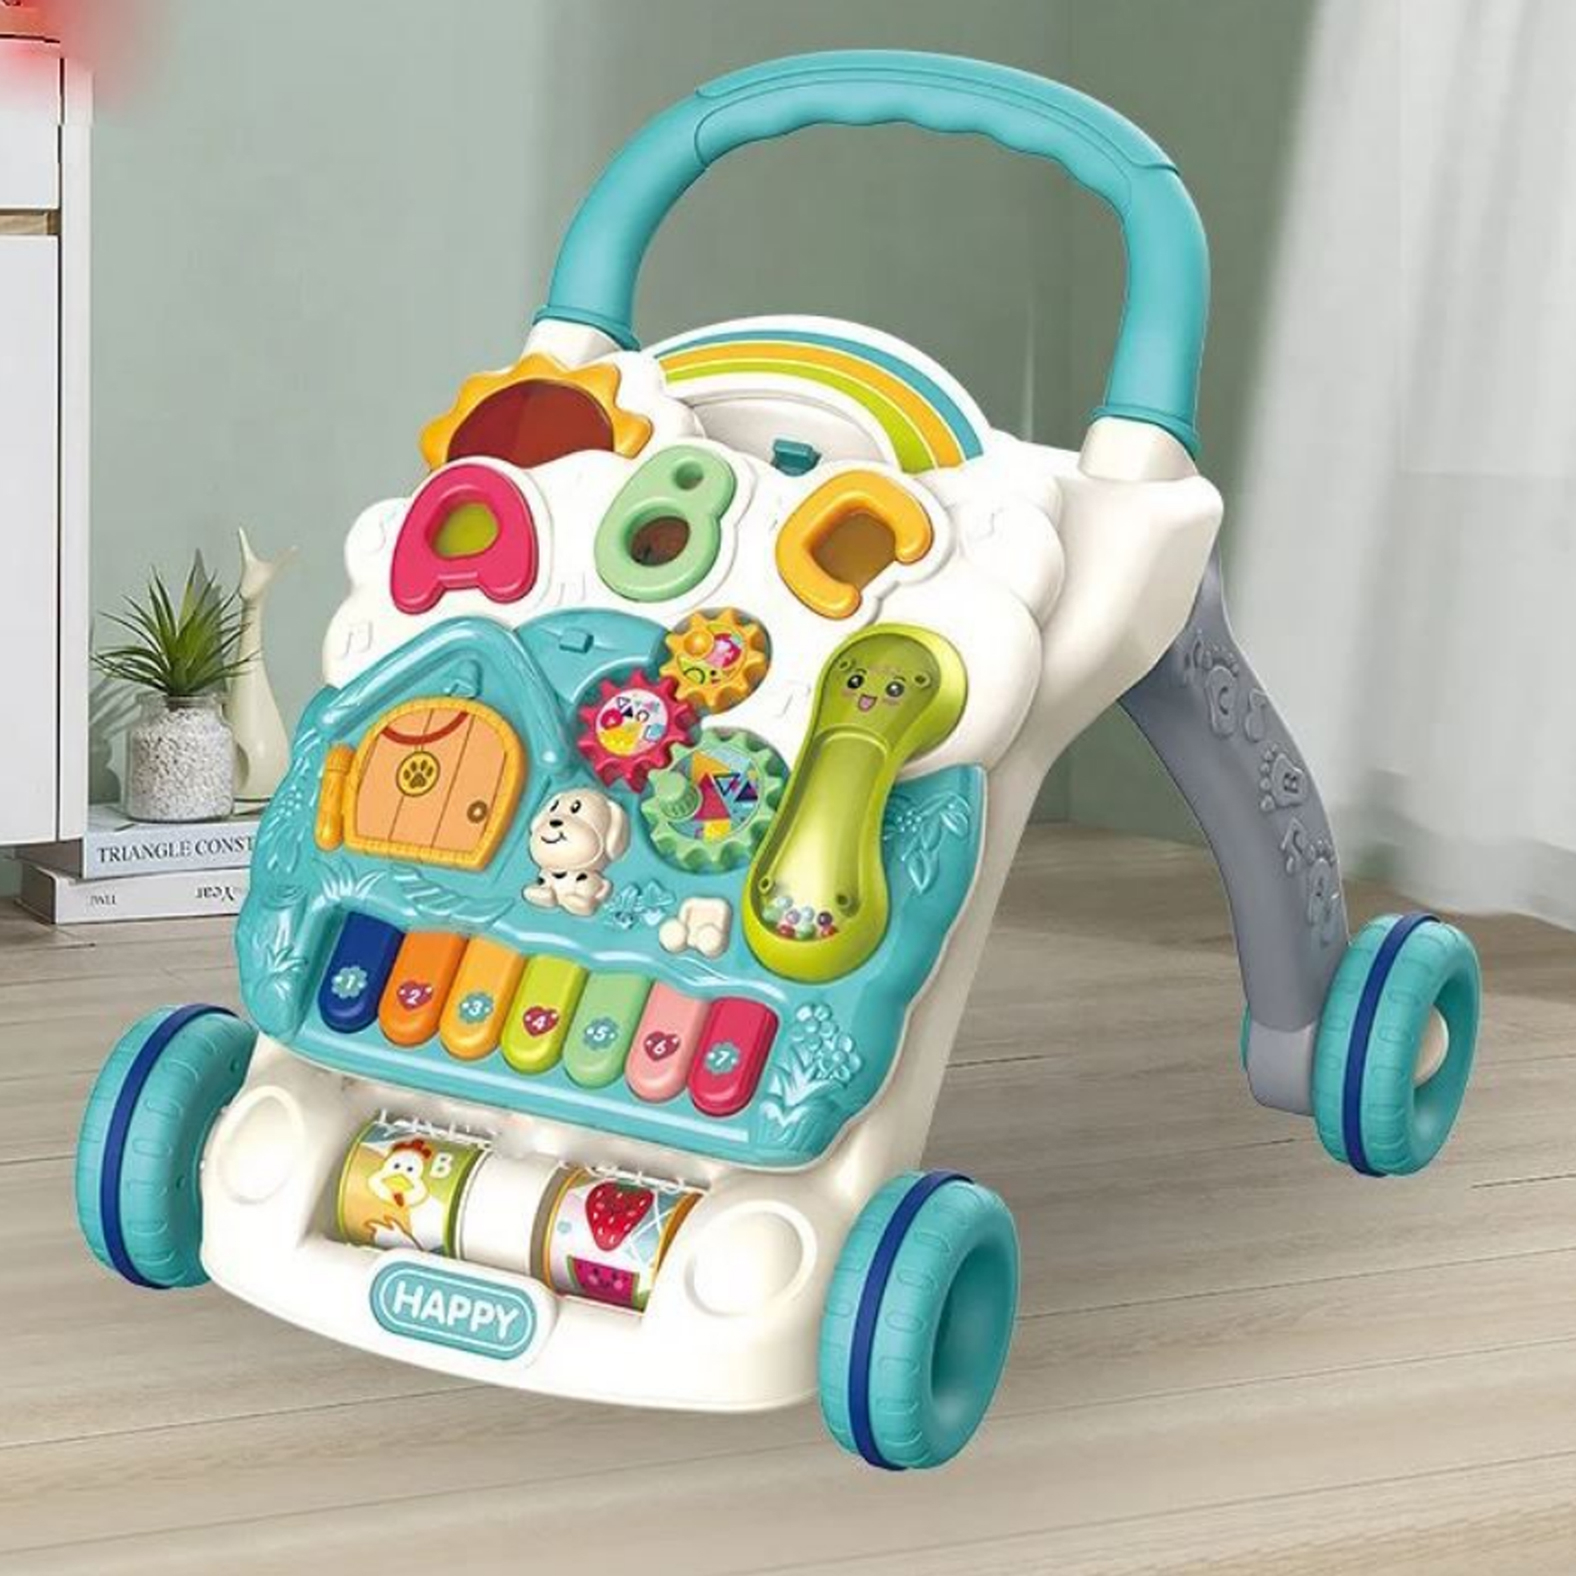 to continue so much Mosque 35% off on Multifunctional Baby Walker